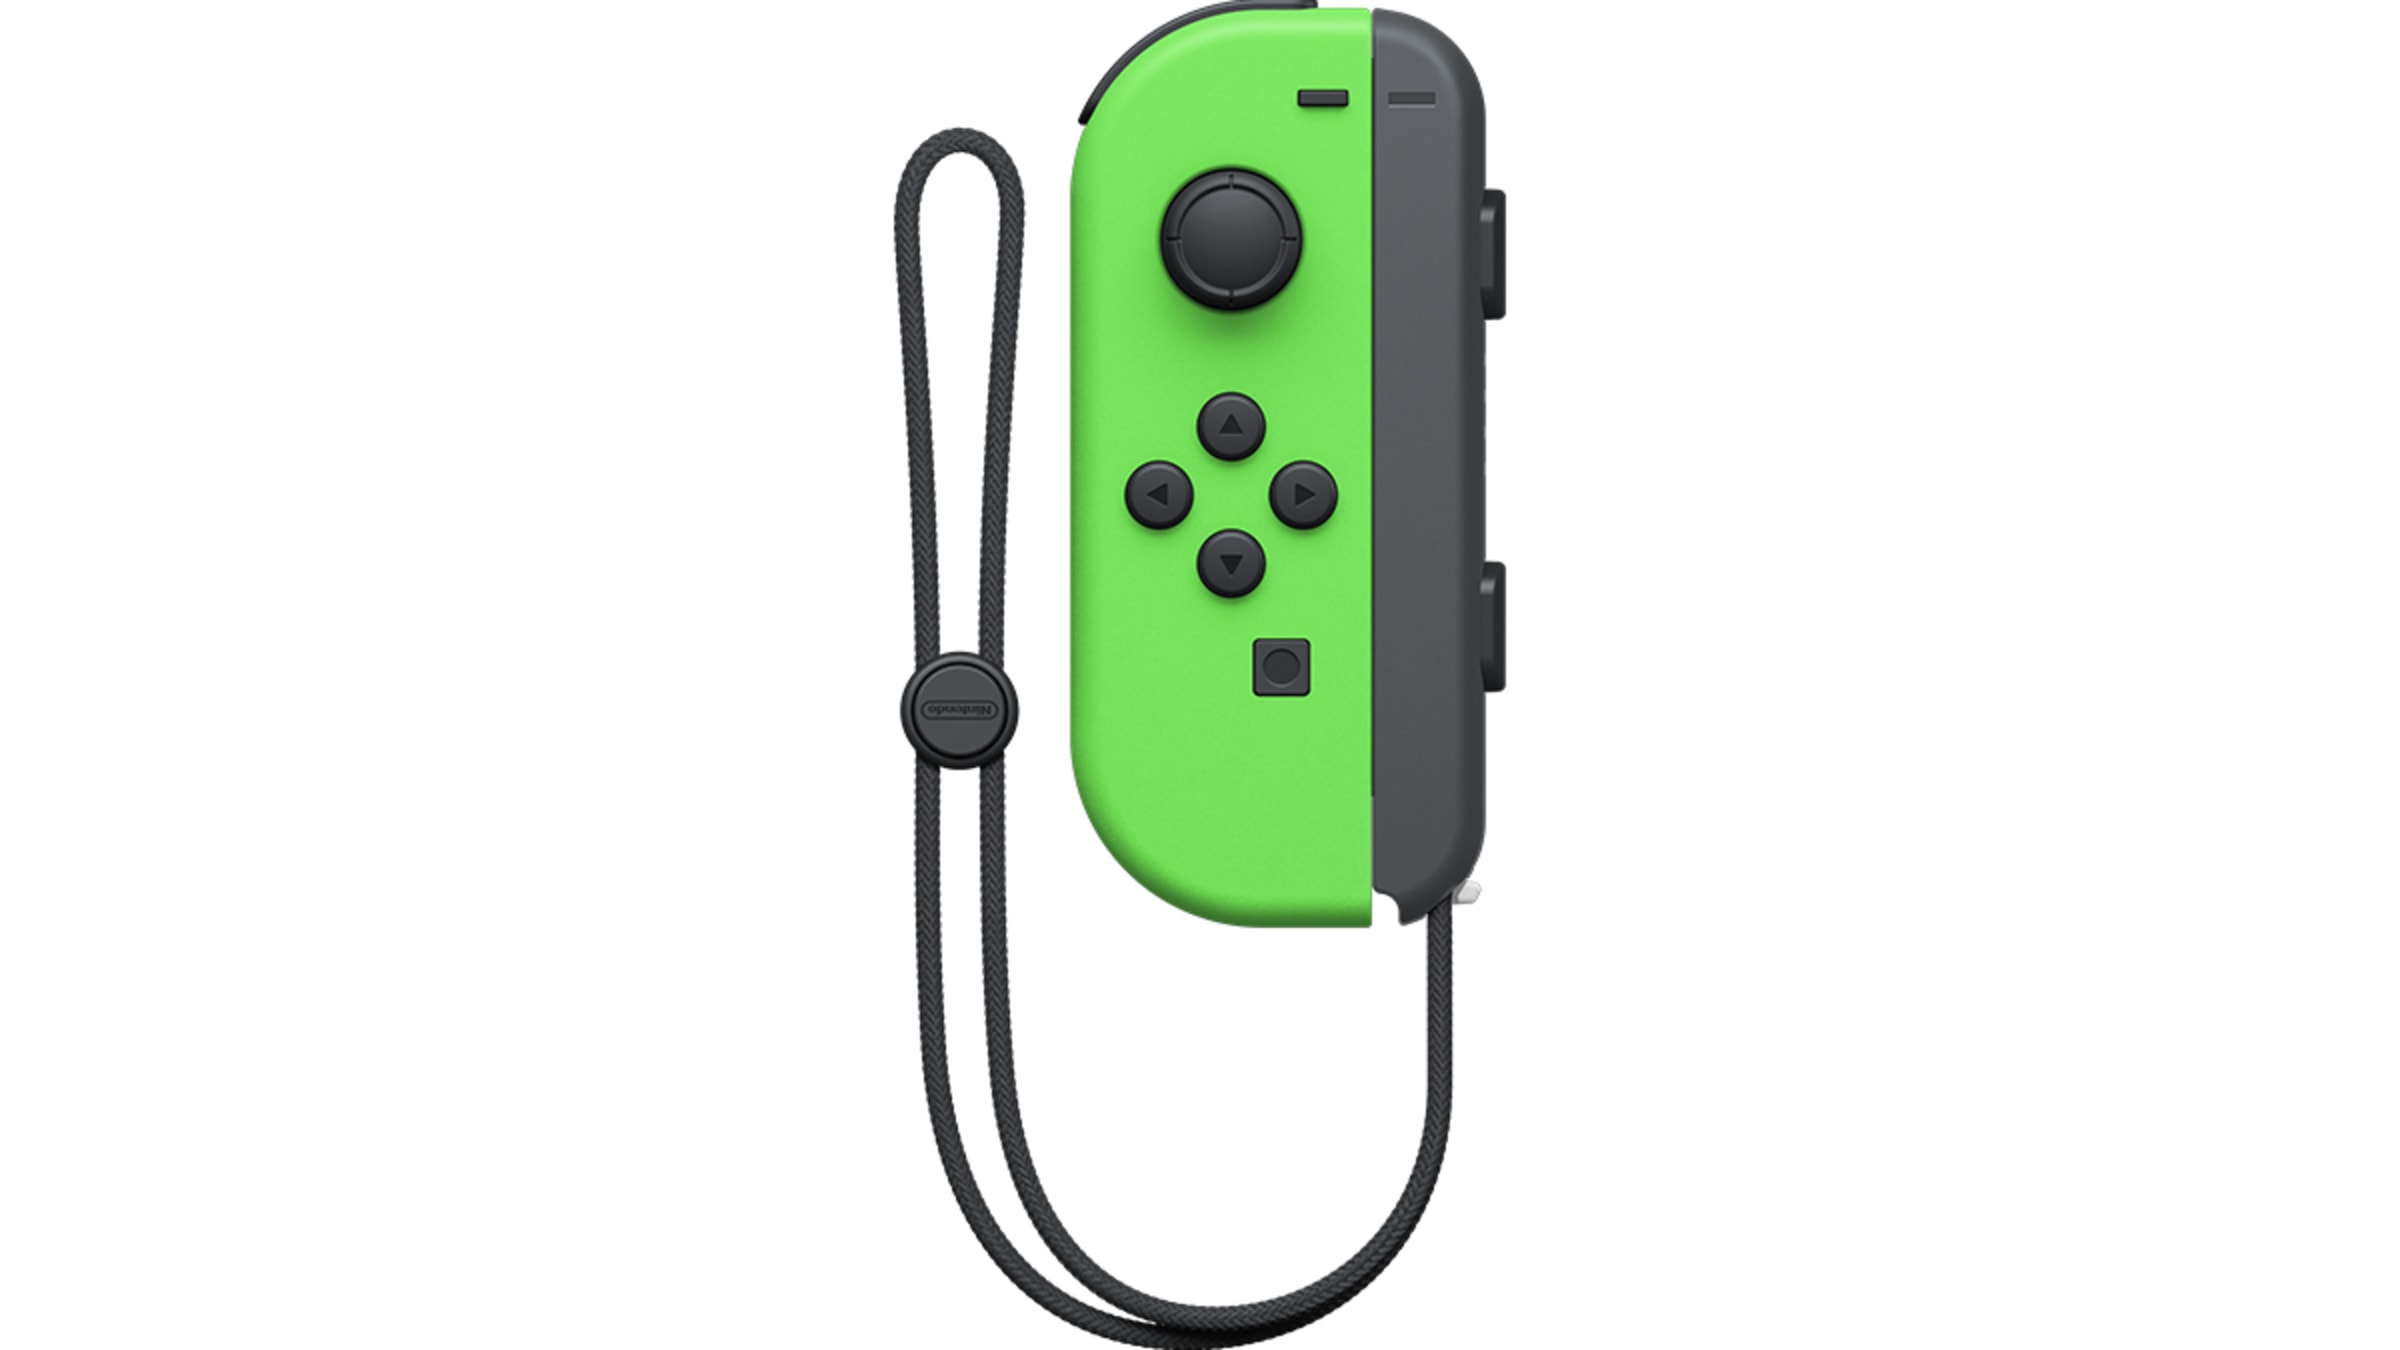 Nintendo Joy-Con (L/R) Wireless Controllers for Nintendo Switch - Neon  Green for sale online